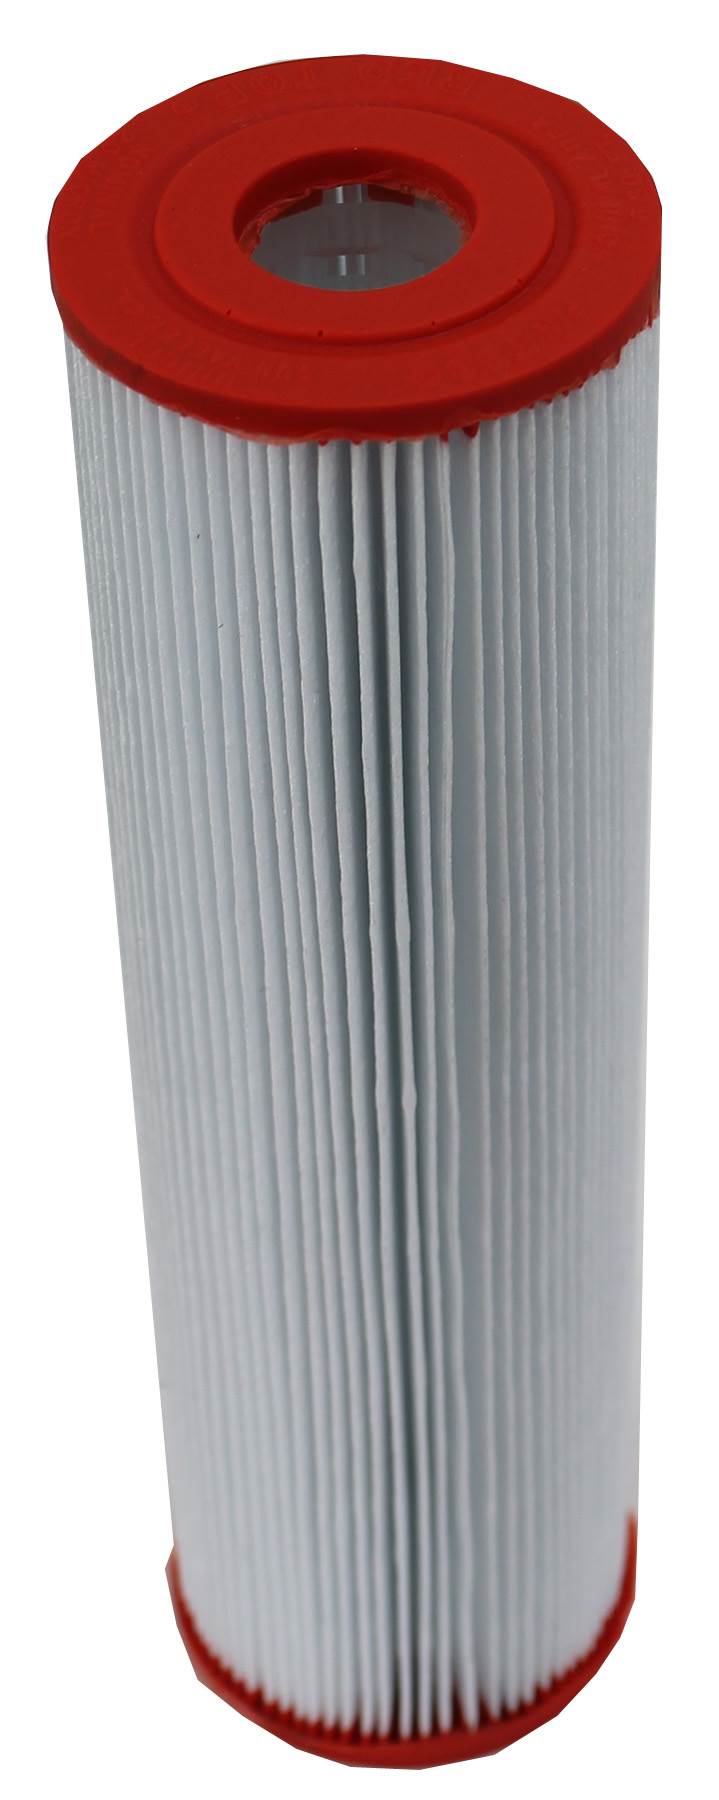 Unicel T-380 T-380R Harmsco Replacement Swimming Pool Cartridge Filter (8 Pack)